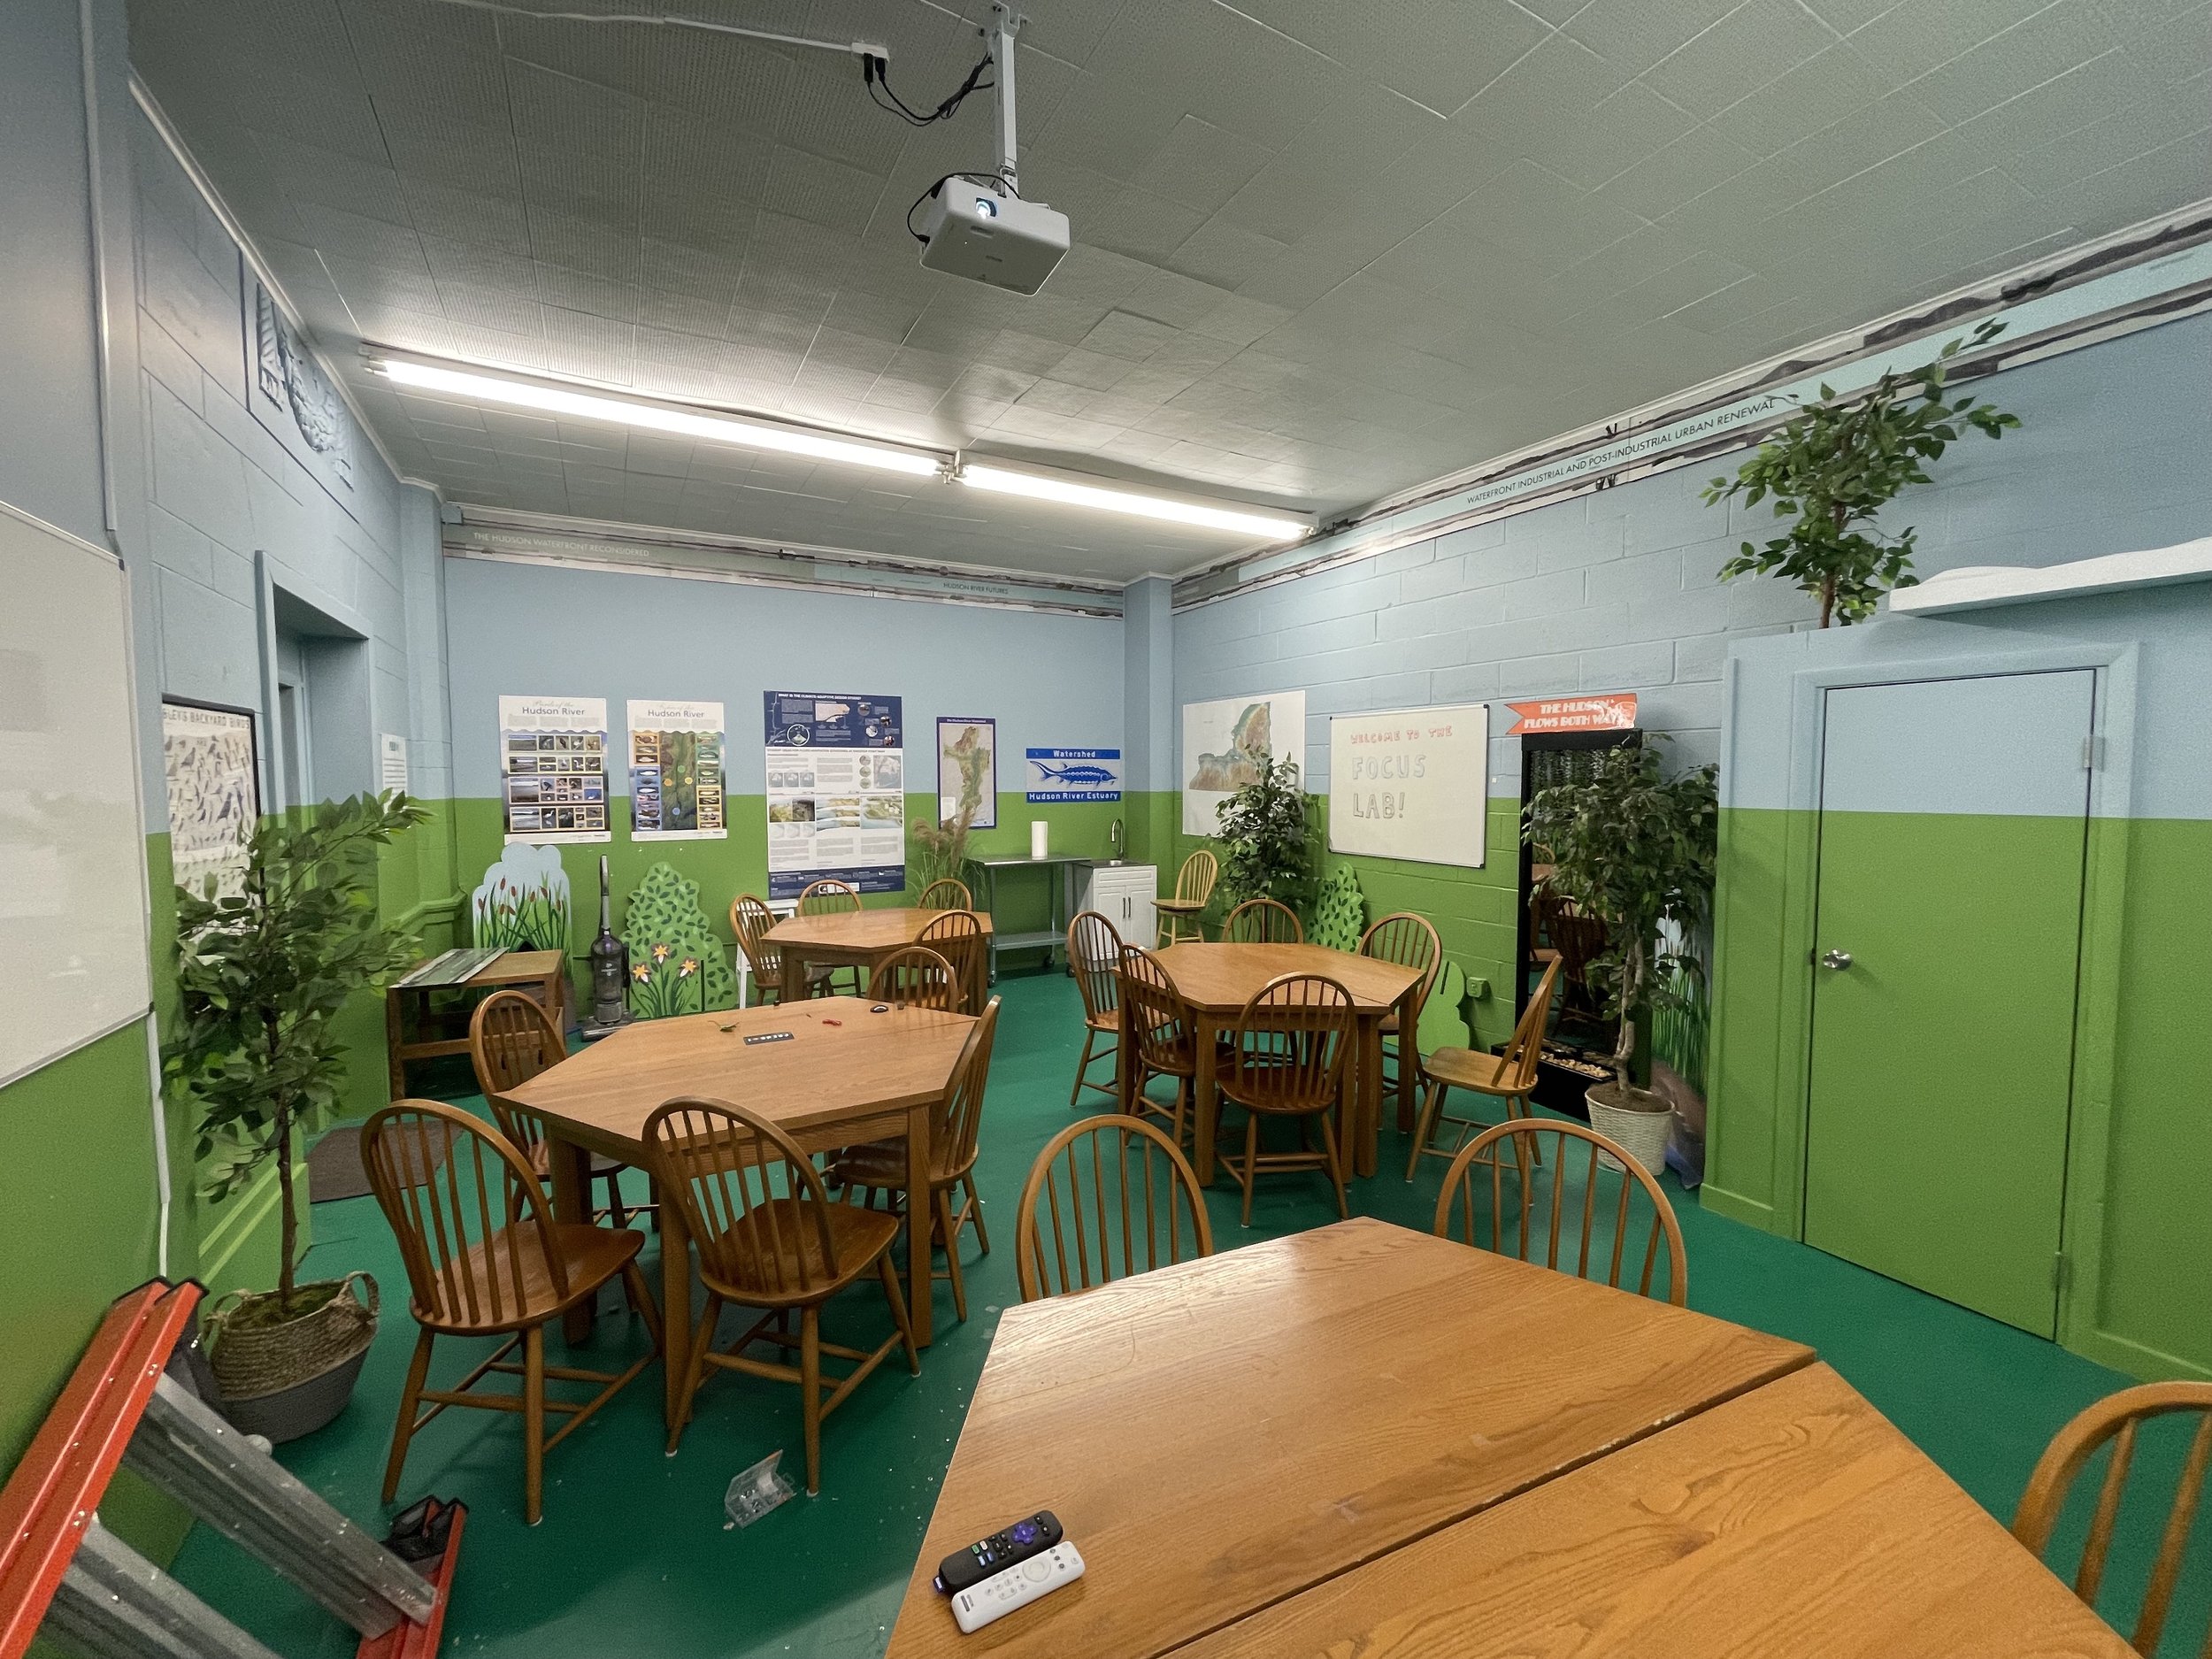   The FOCUS Lab classroom, where educators discussed climate and sustainability curriculum.  